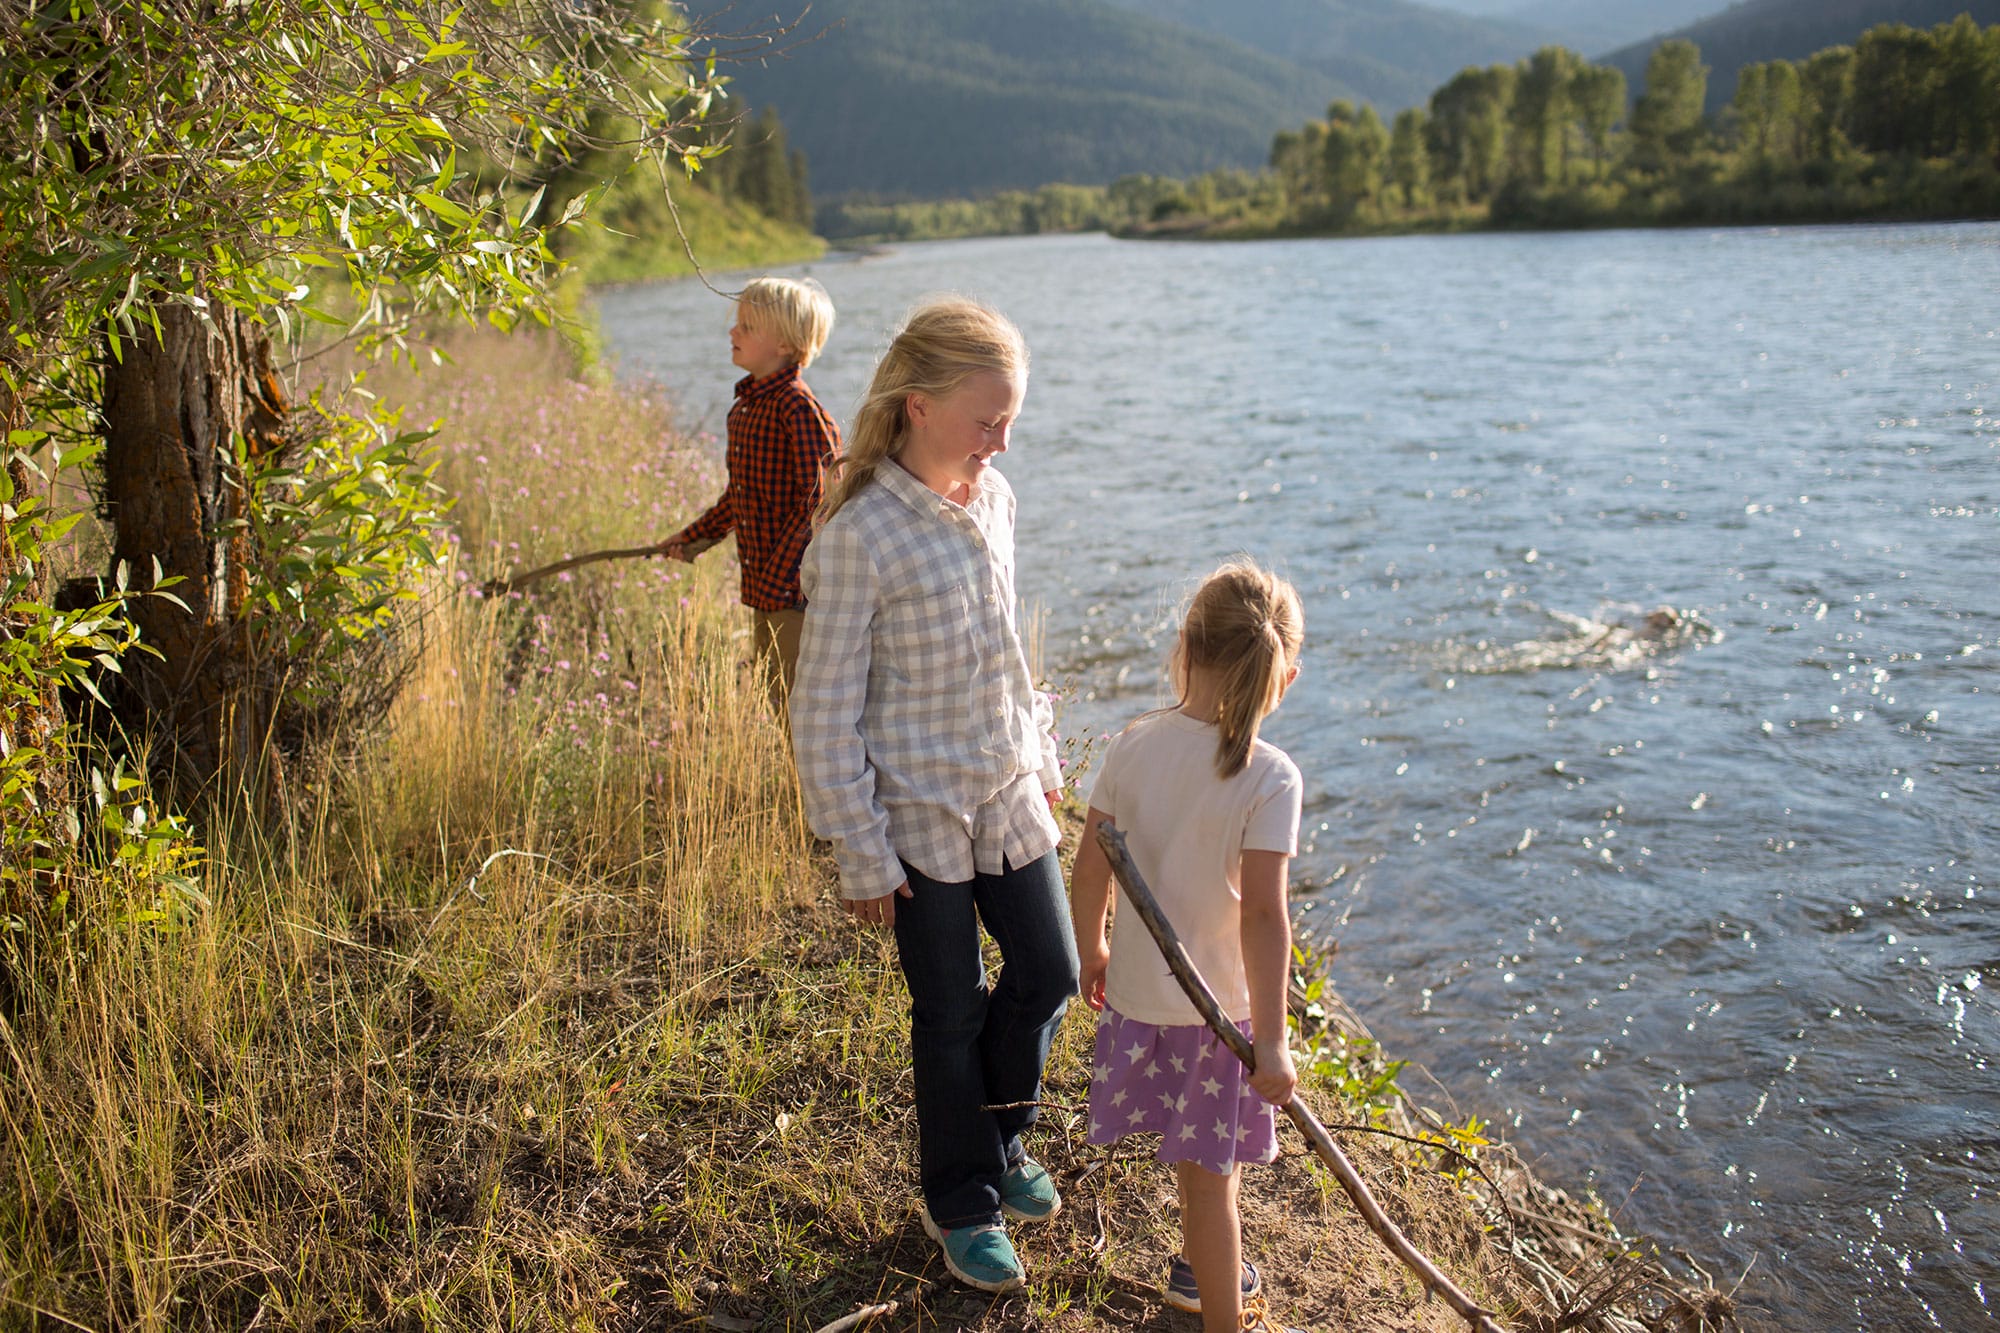 A group of children standing on the shore of a river.